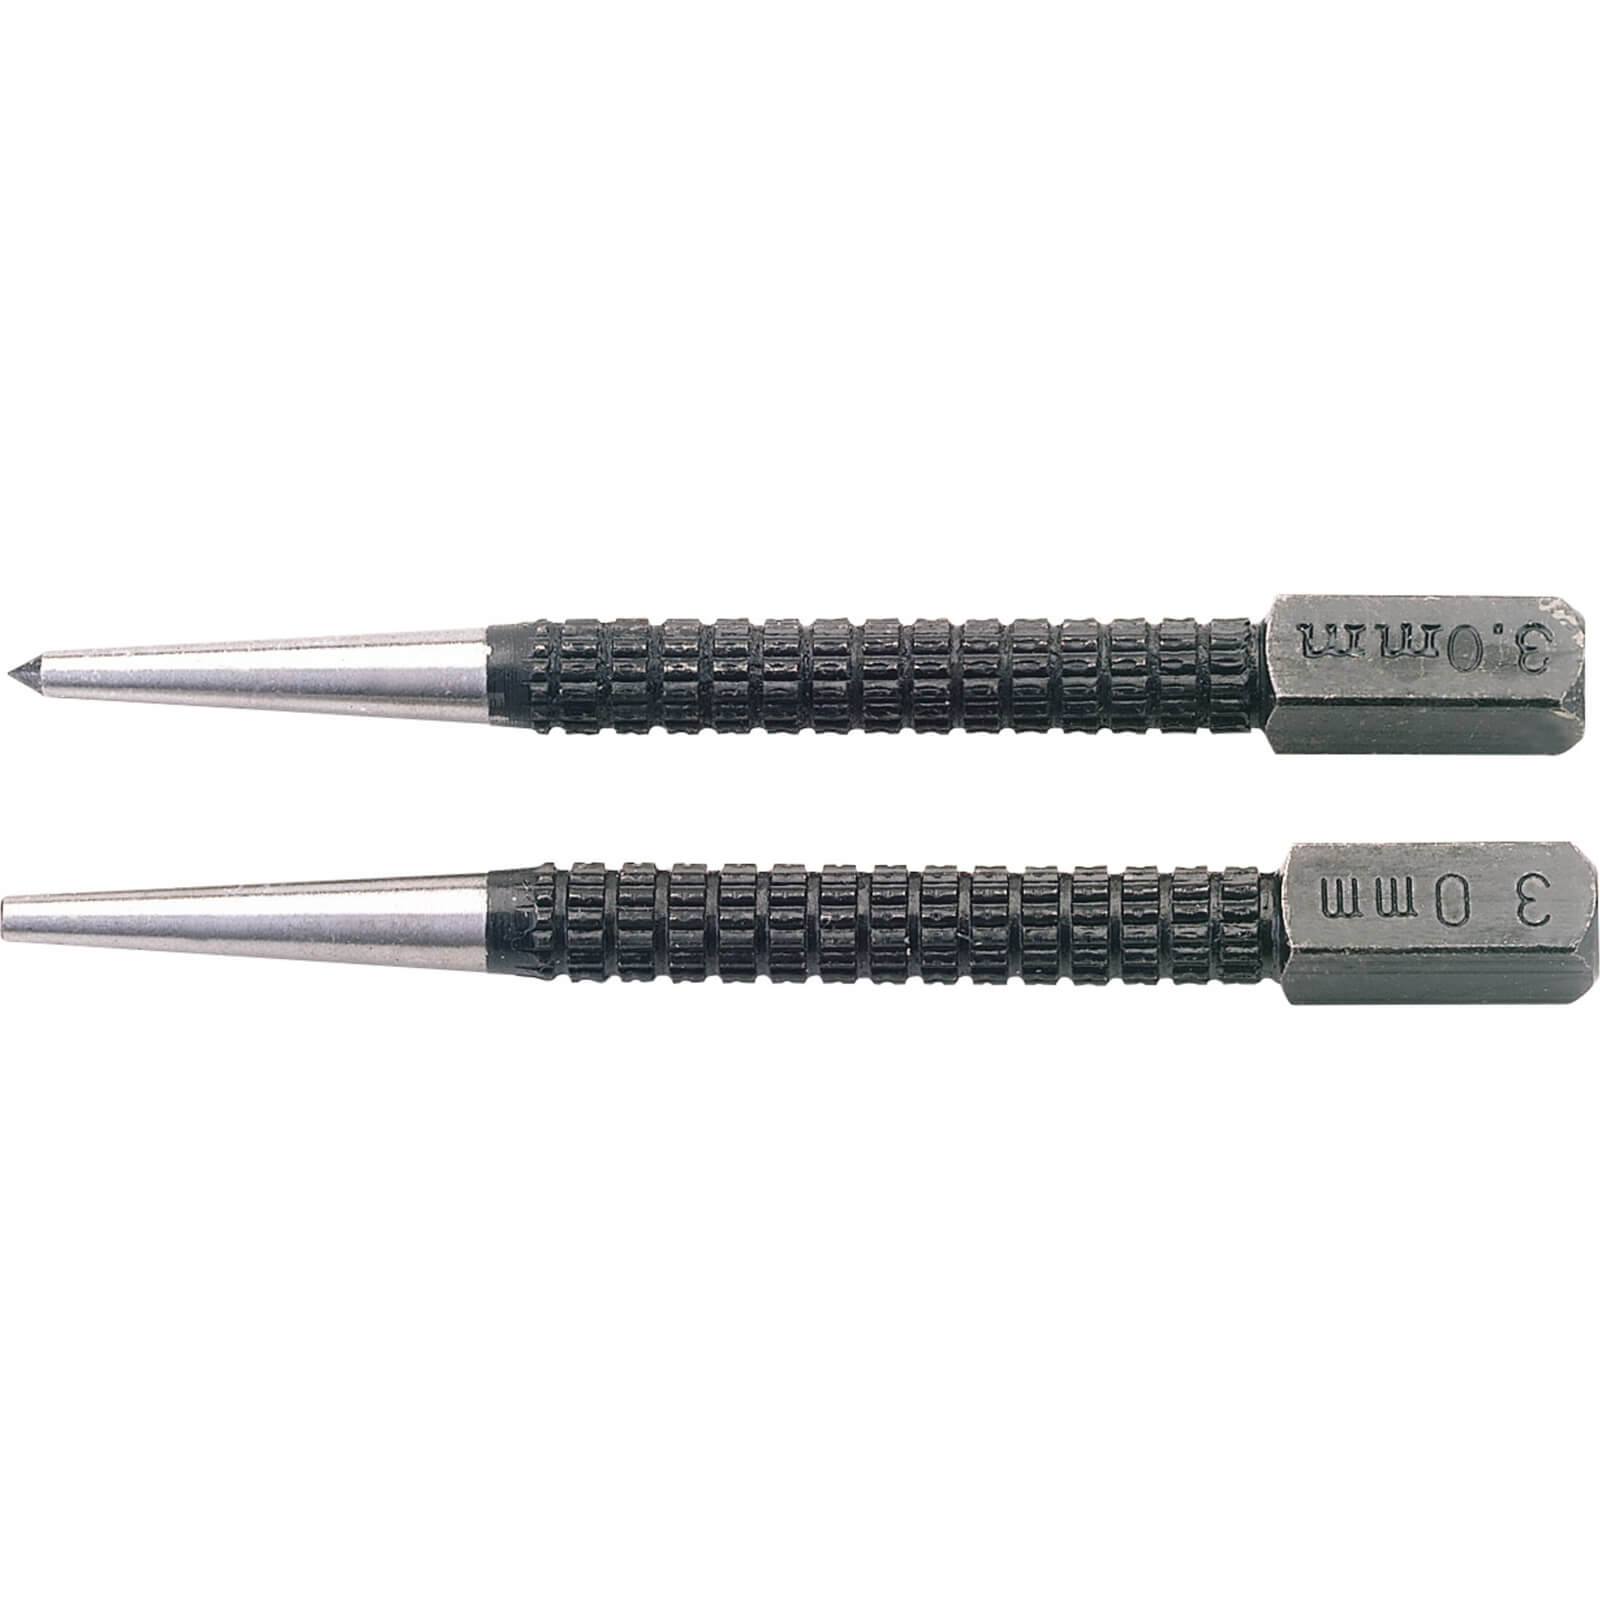 Image of Draper 2 Piece Nail Set and Centre Punch Set